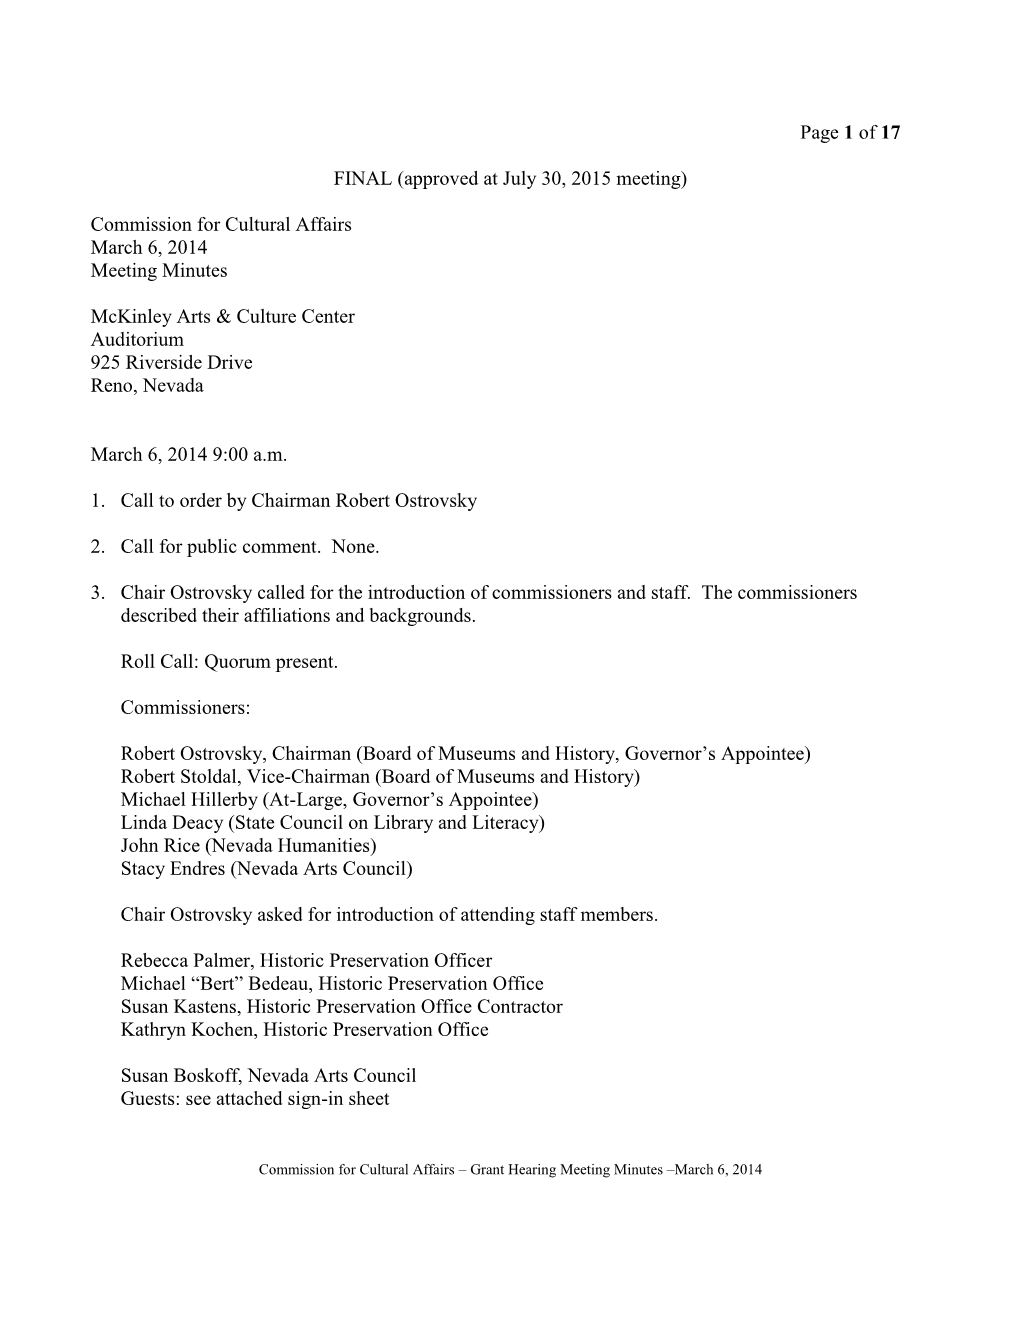 Commission for Cultural Affairs March 6, 2014 Meeting Minutes